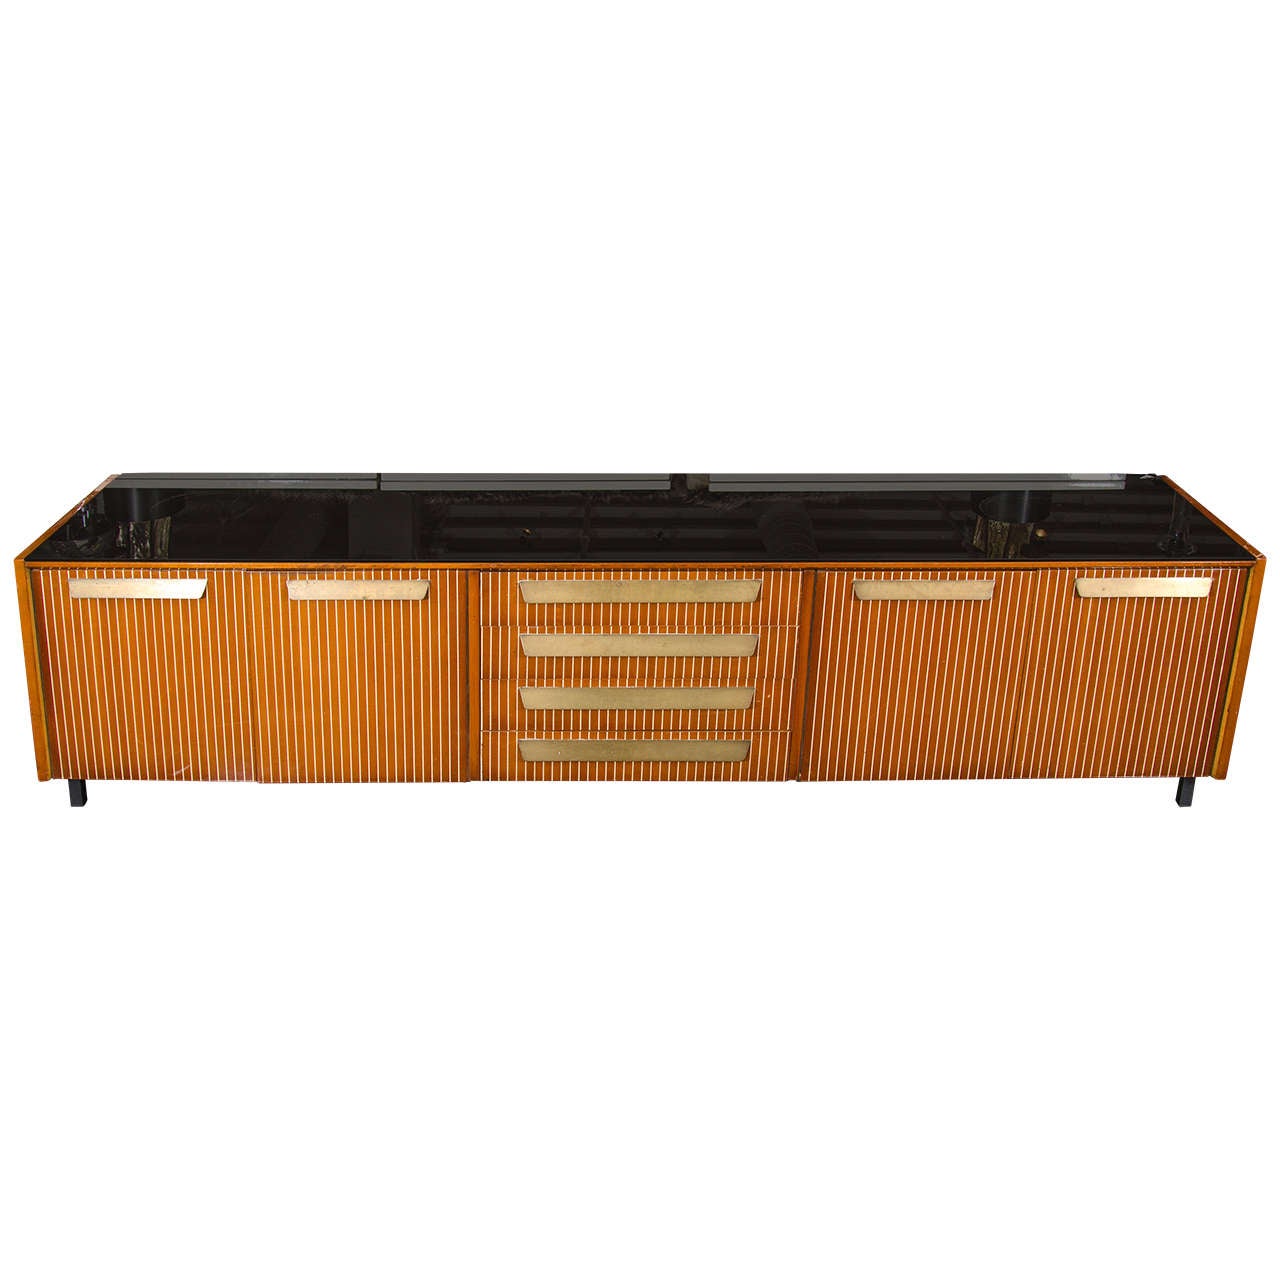 Italian console with inlaid birch strips on mahogany, brass pulls for a center panel of drawers and side cabinets left and right.
The exterior is black on each side with a piece of black glass as the top.